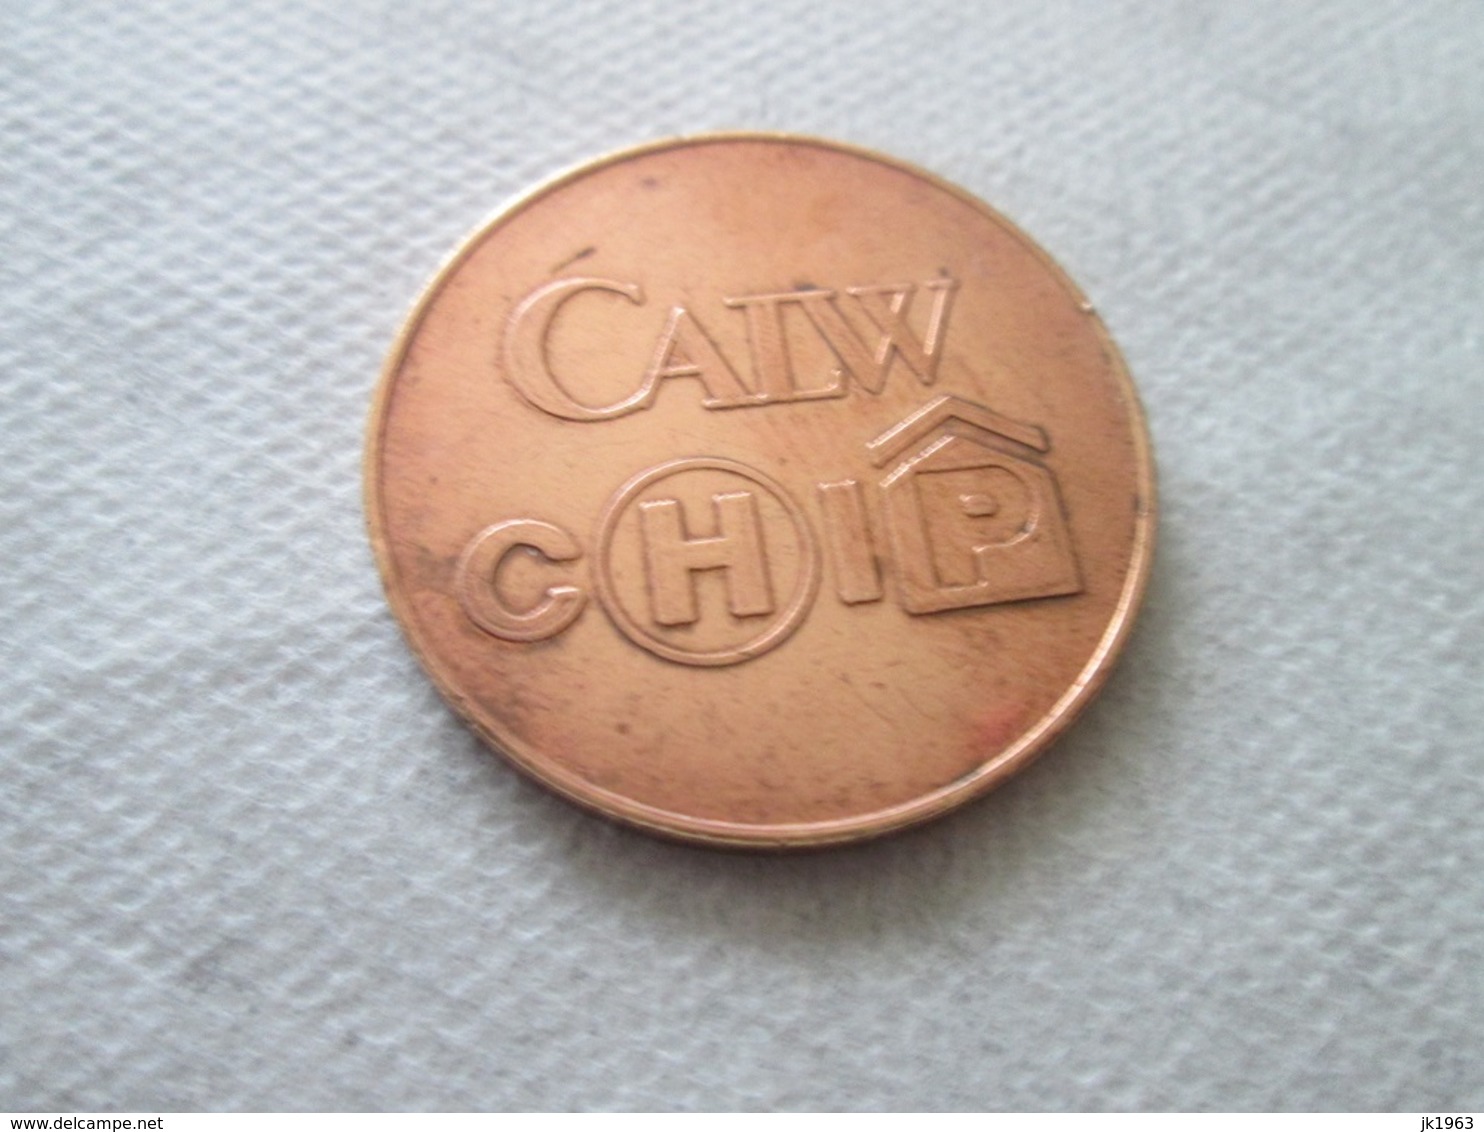 CALW CHIP, GERMANY, CHIP FOR PARKING - Professionals/Firms